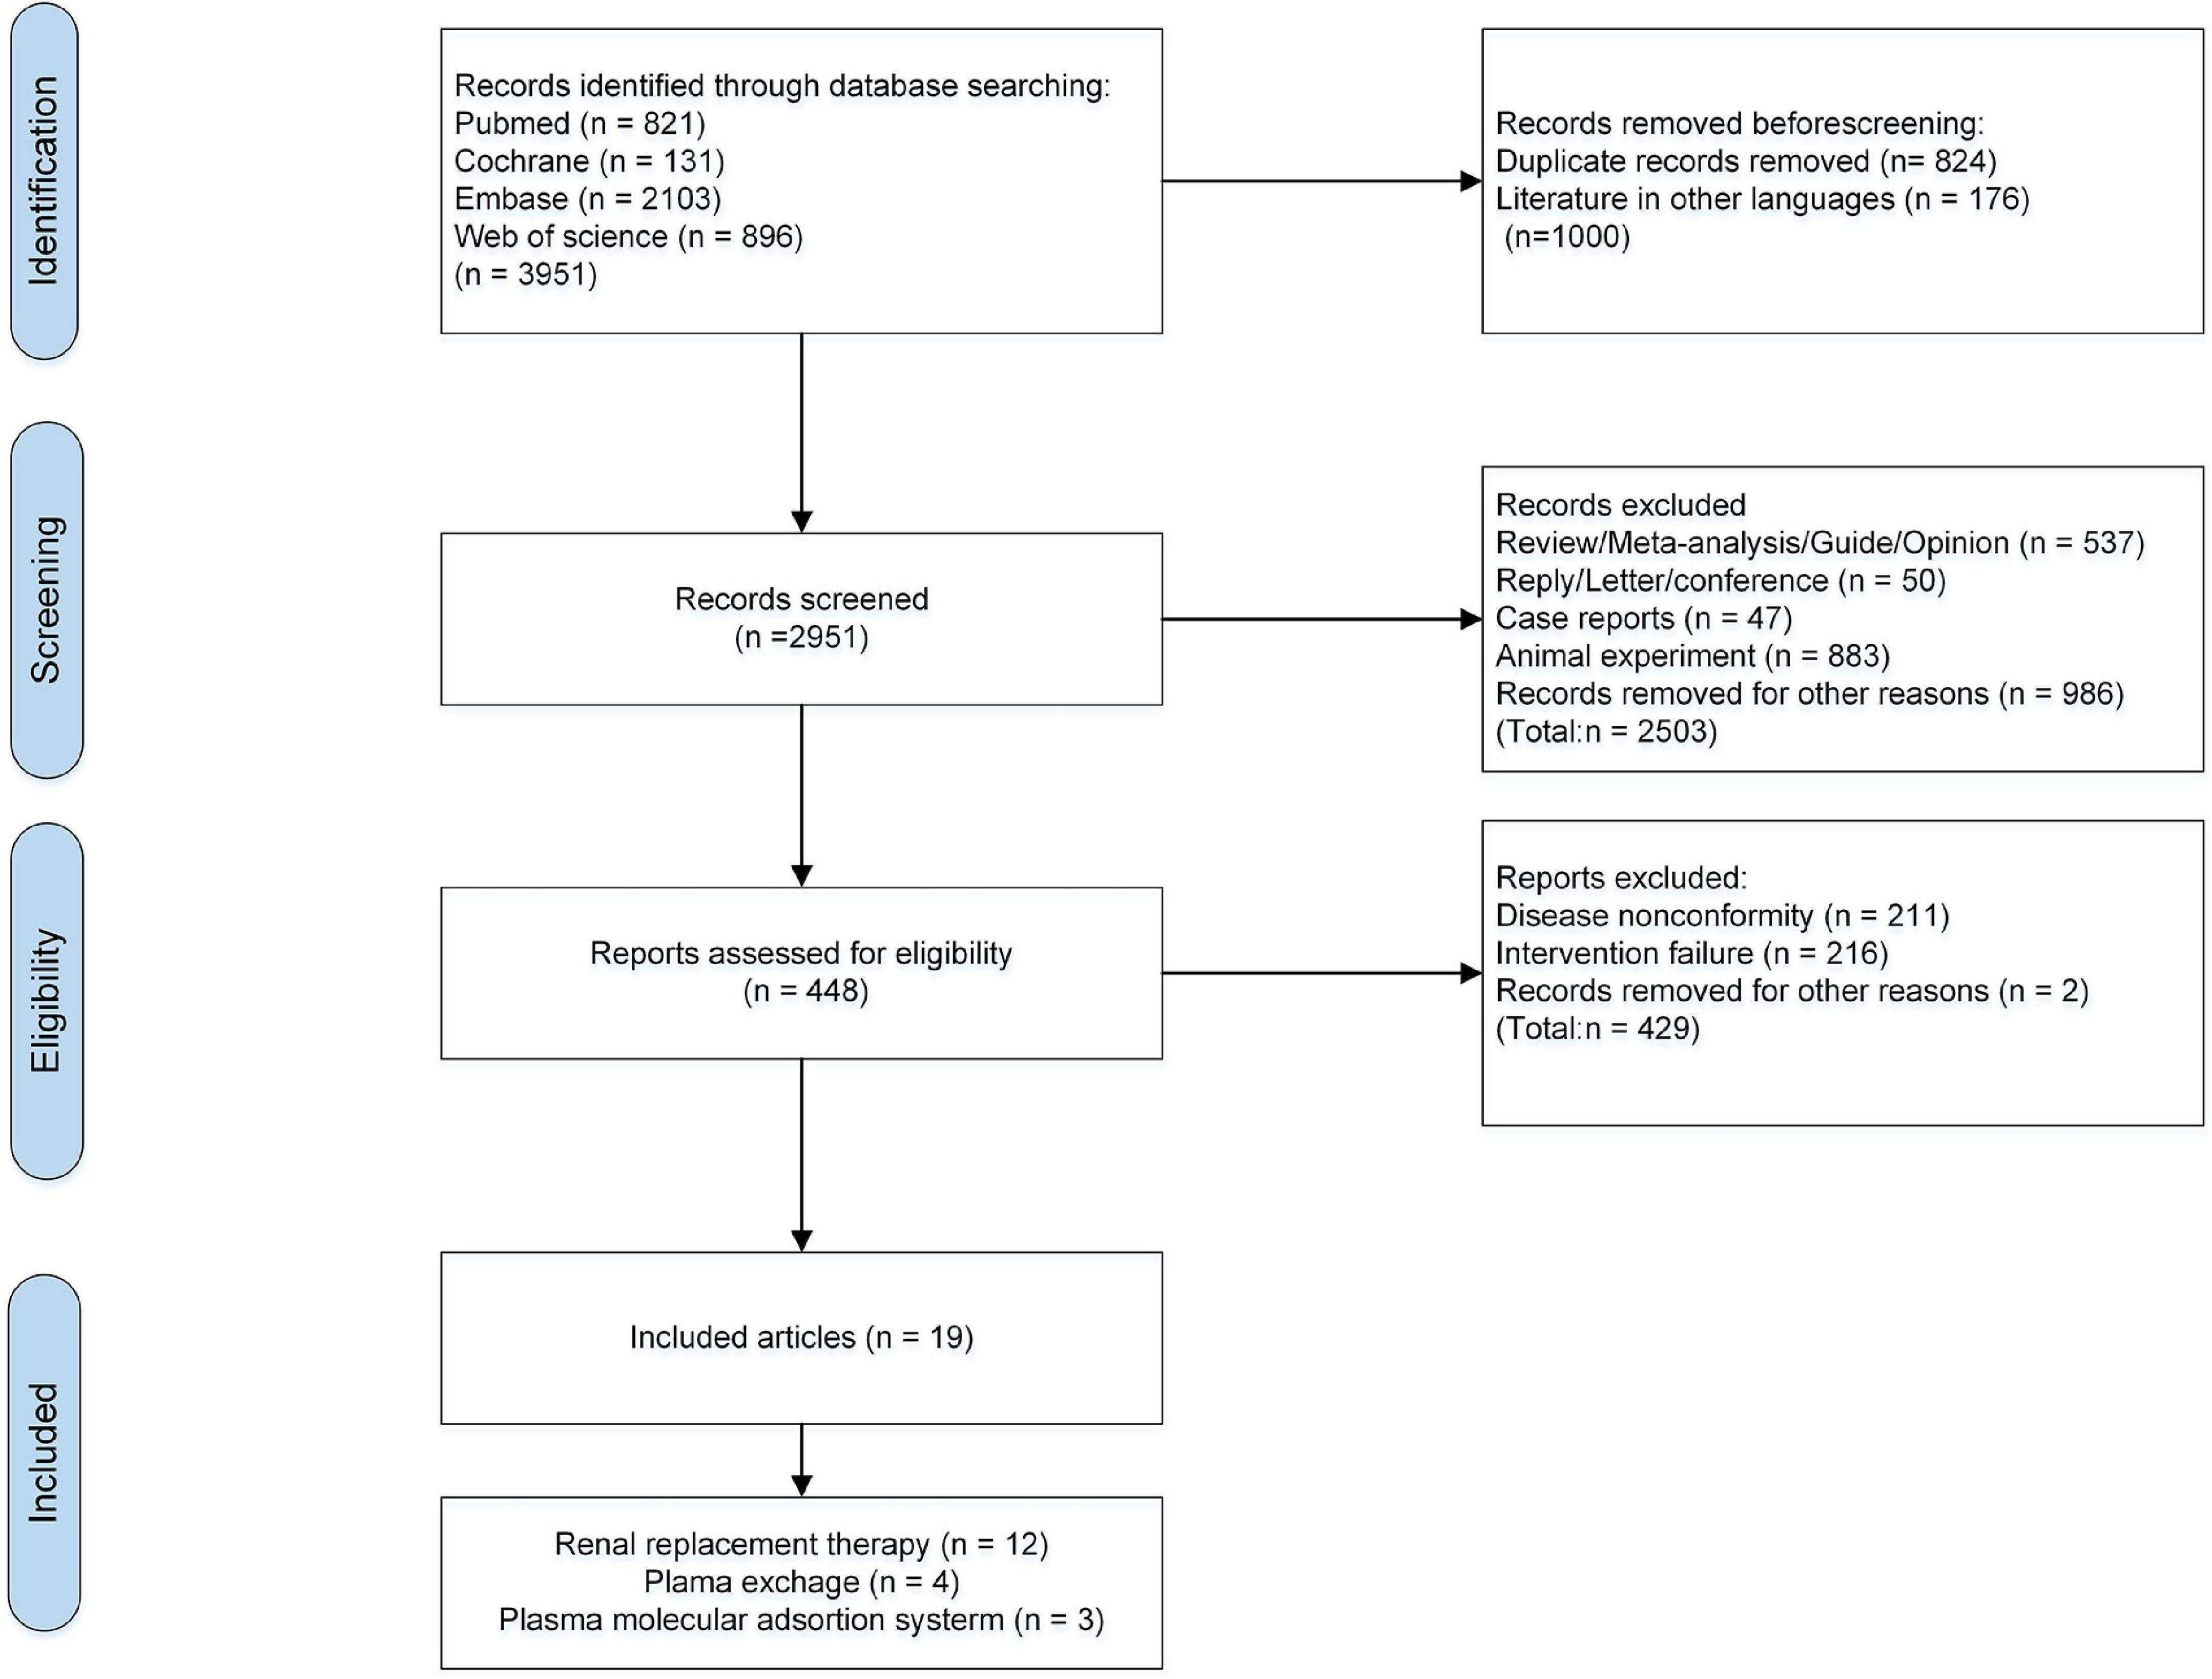 Regional citrate anticoagulation for replacement therapy in patients with liver failure: A systematic review and meta-analysis